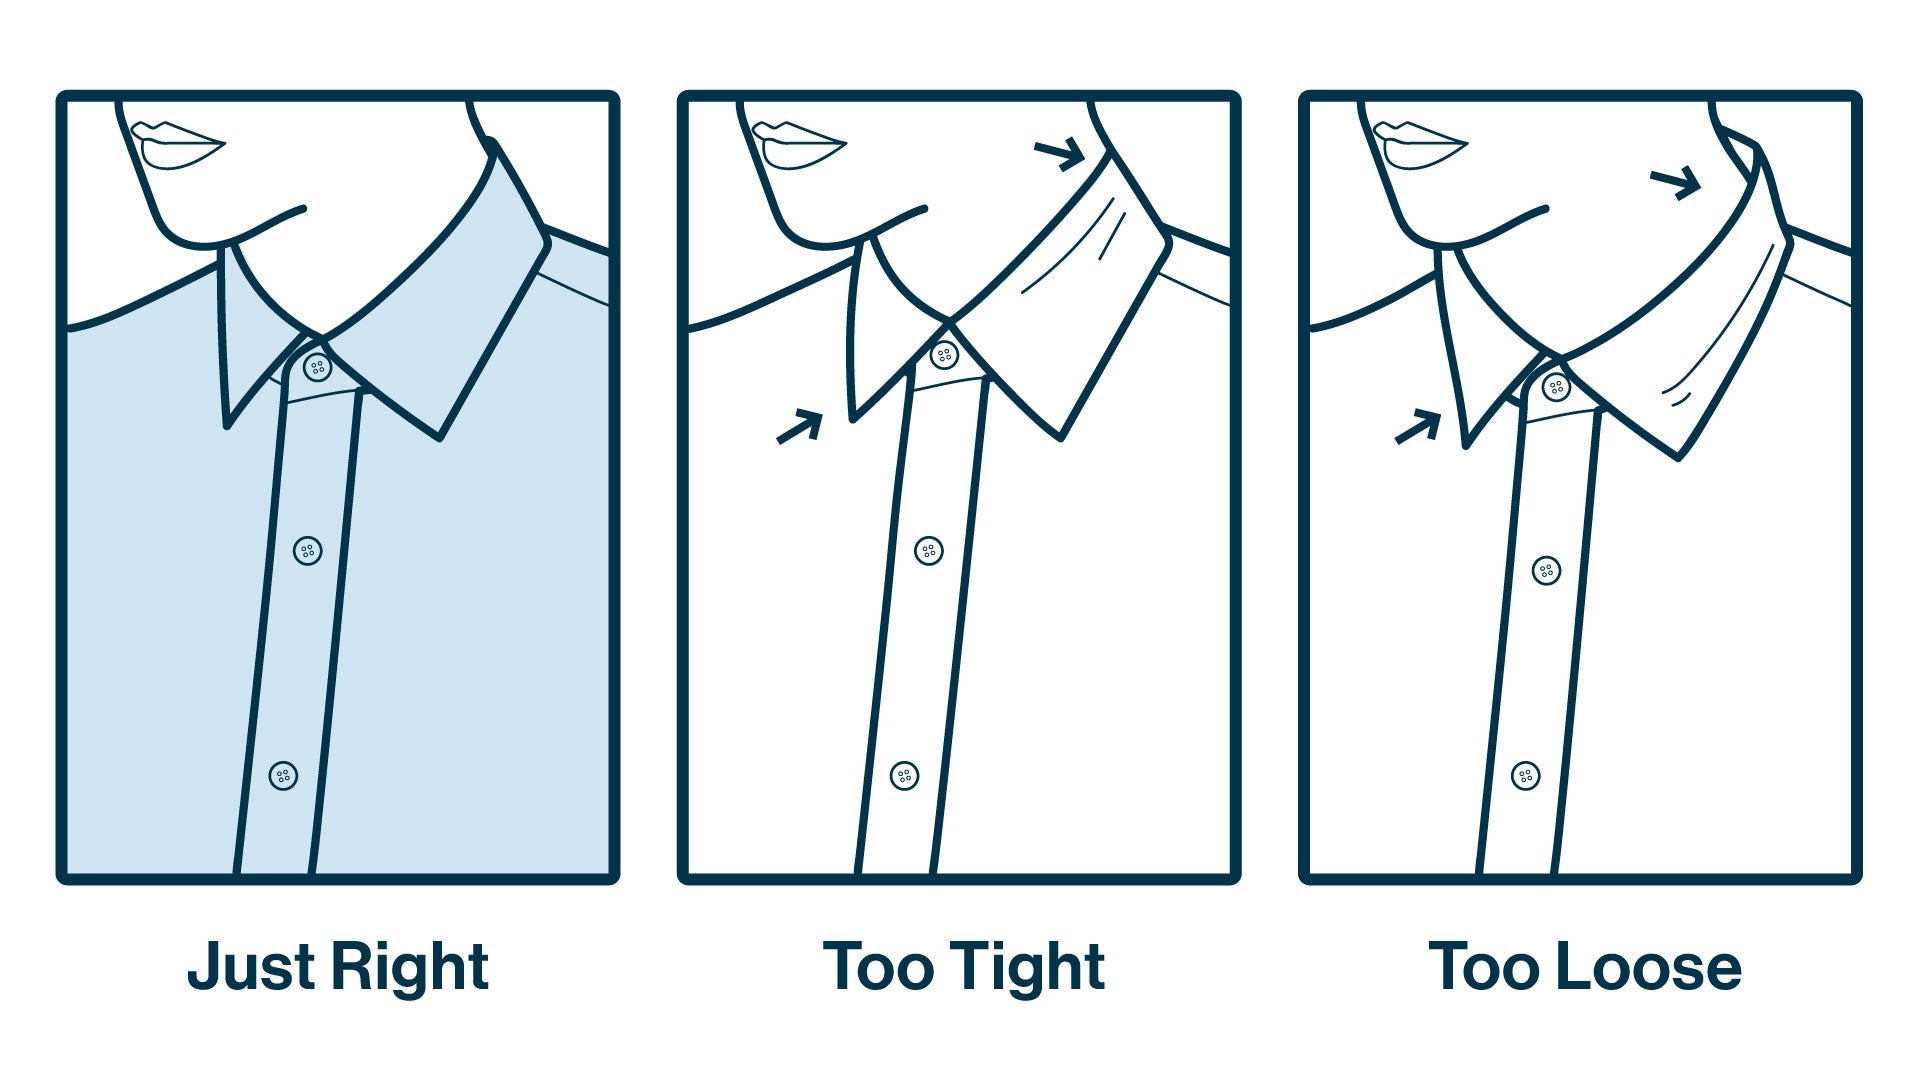 How Your Button Up Shirts Should Fit